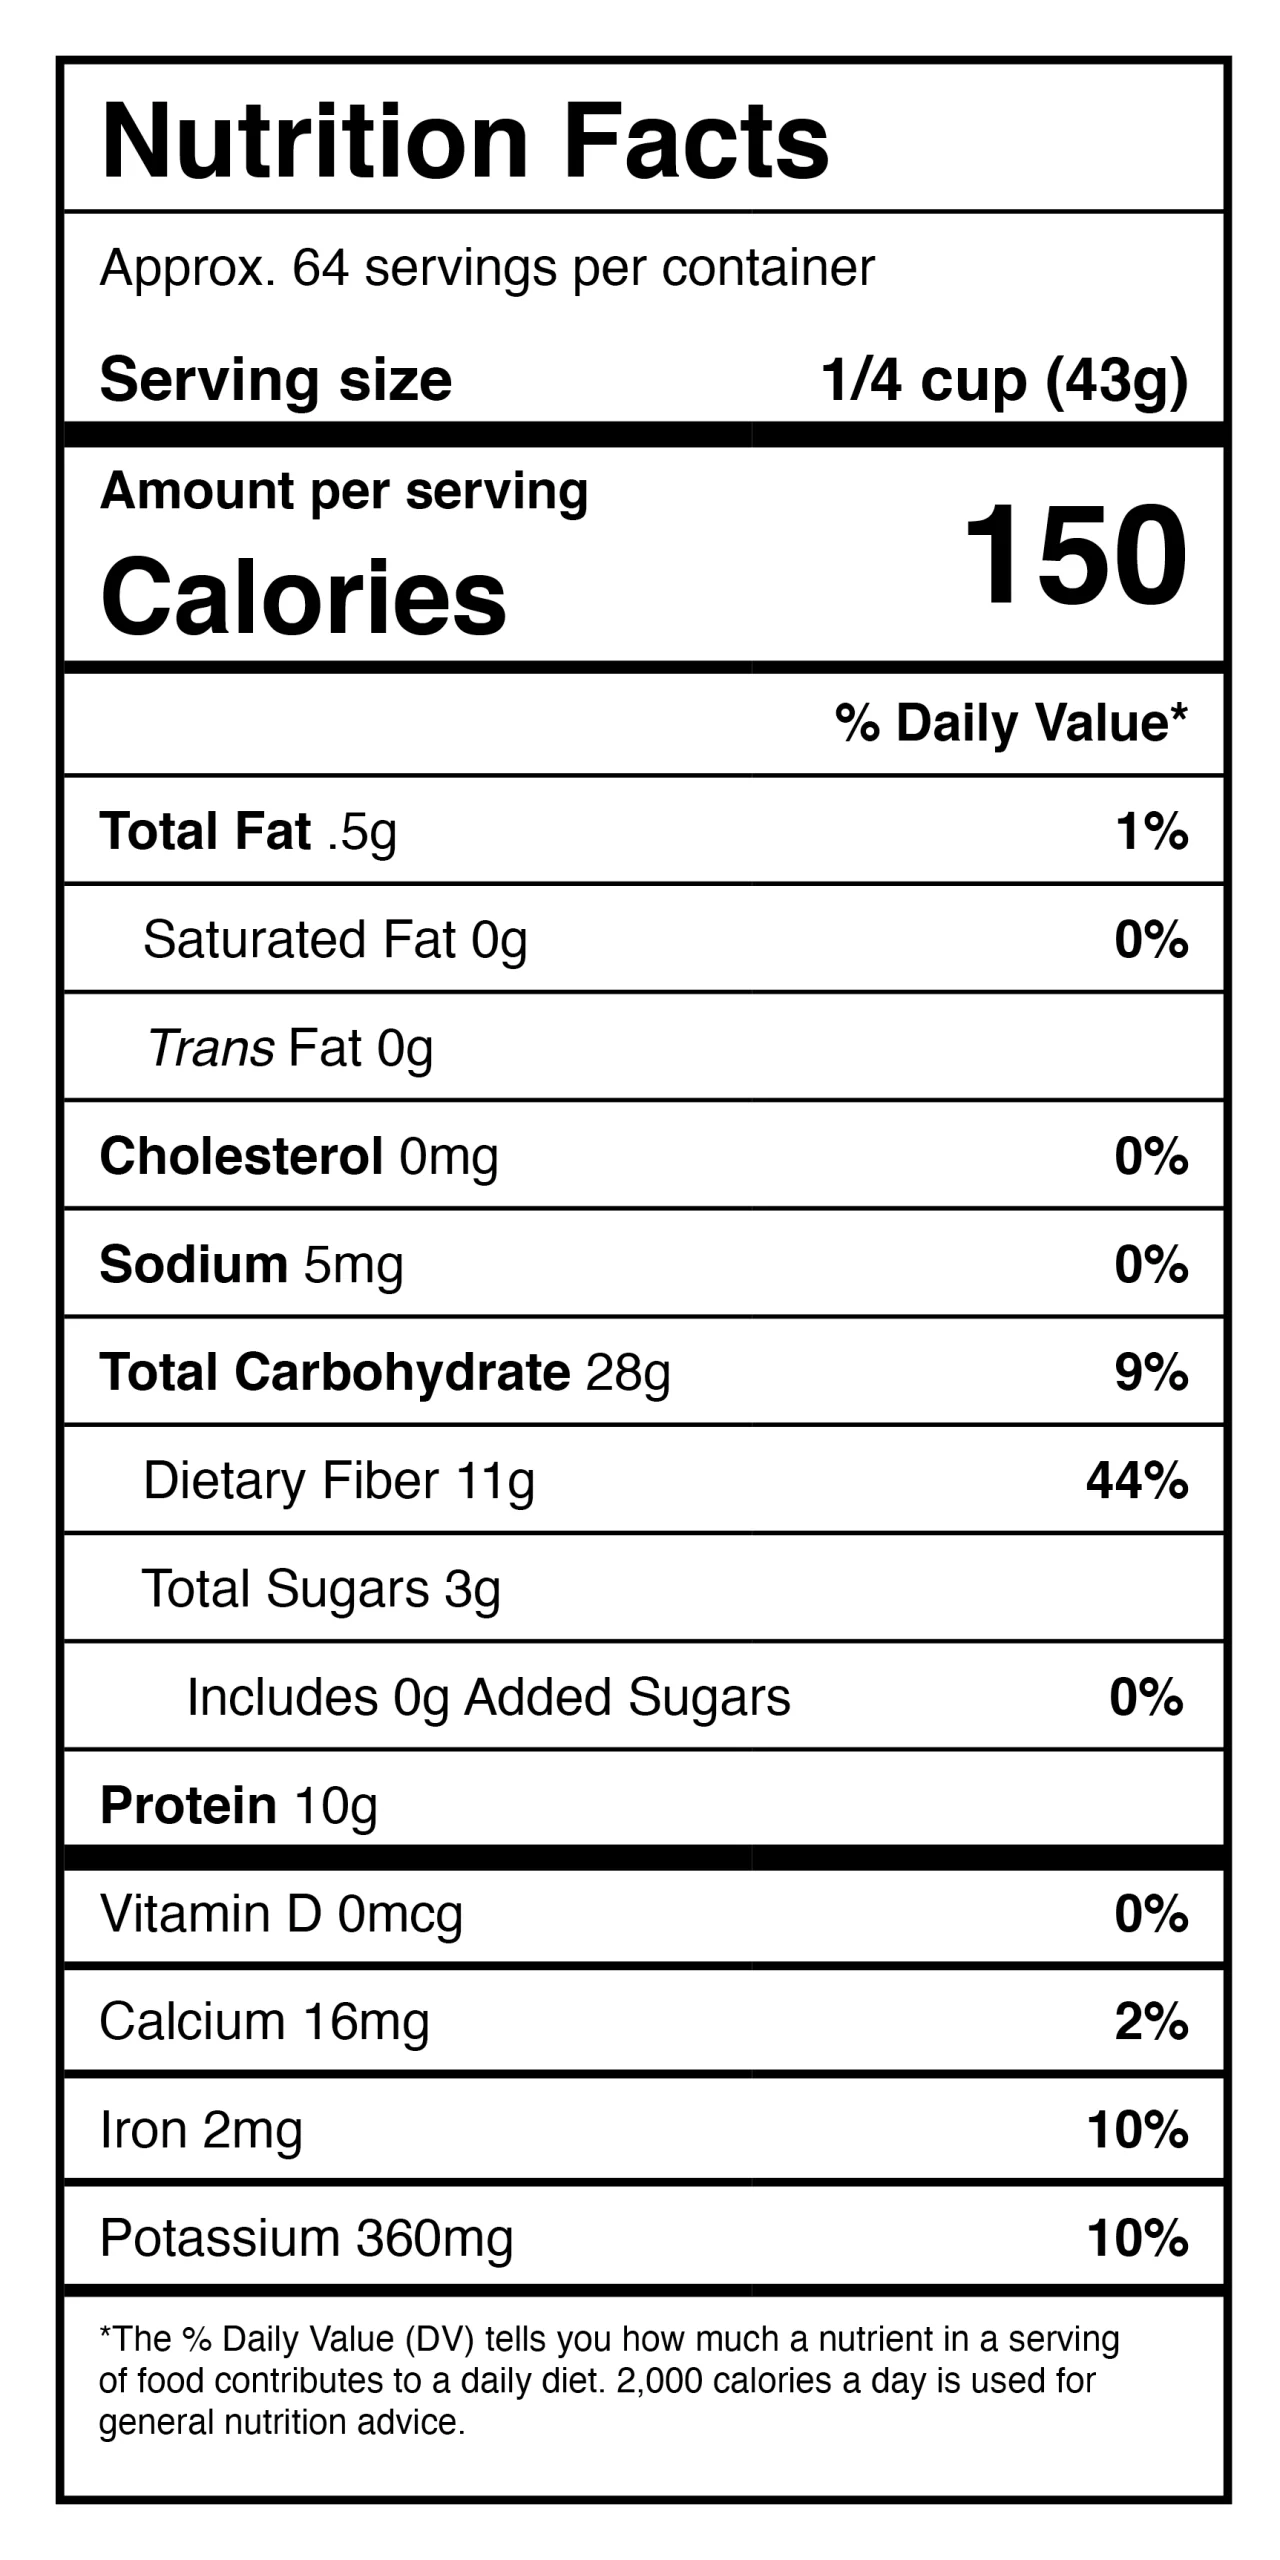 A nutrition label displaying the facts of Harmony House Split Peas (5 lbs).